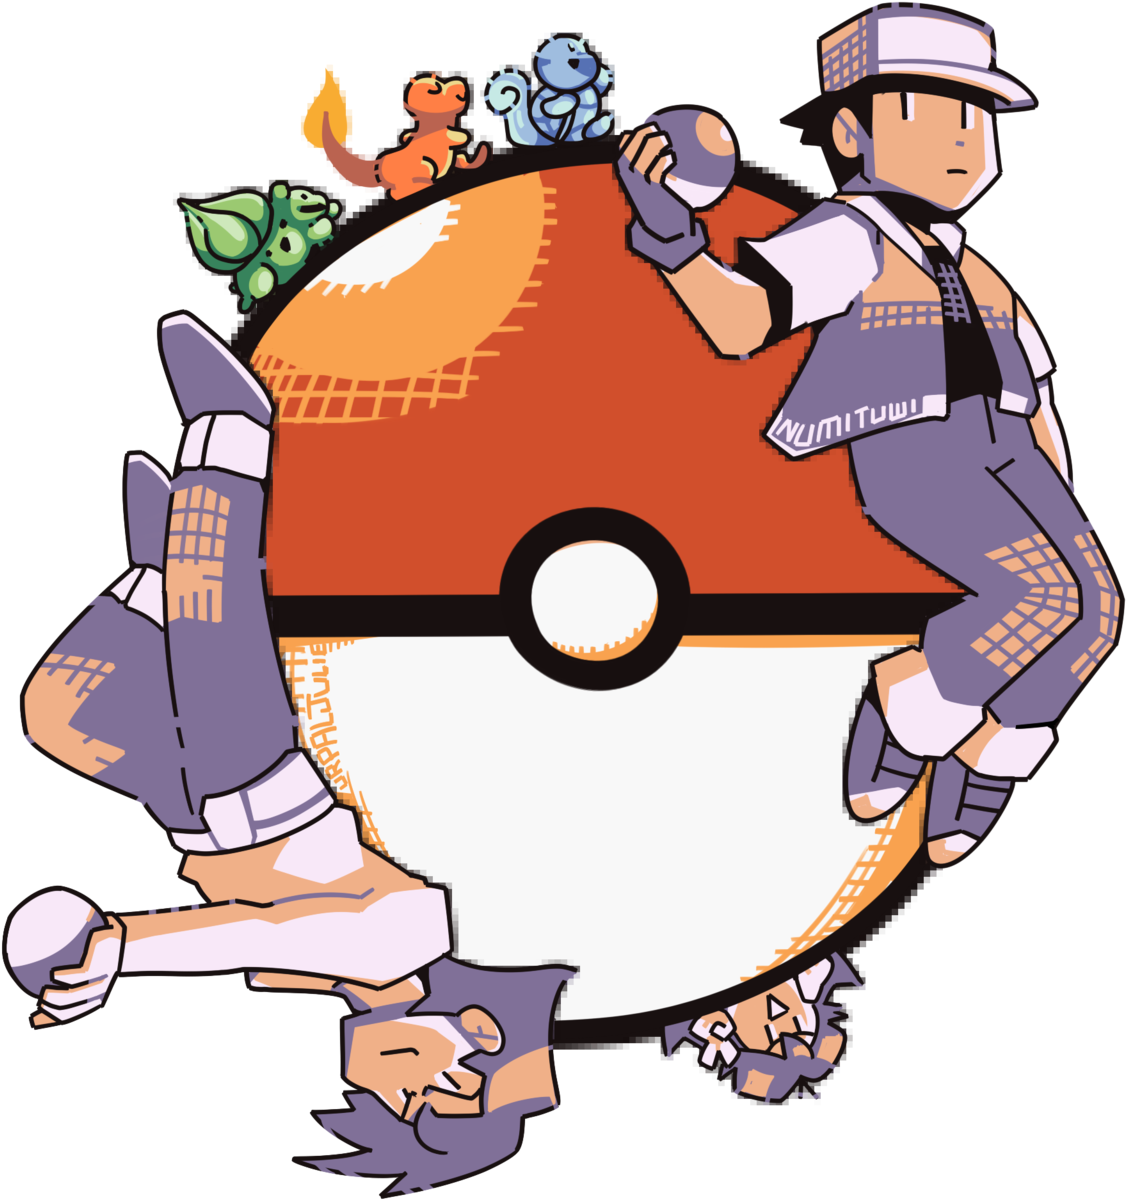 Pokemon Day Pokemon Pokemon Red Bulbasaur Squirtle - Pokémon Red And Blue (1280x1280)